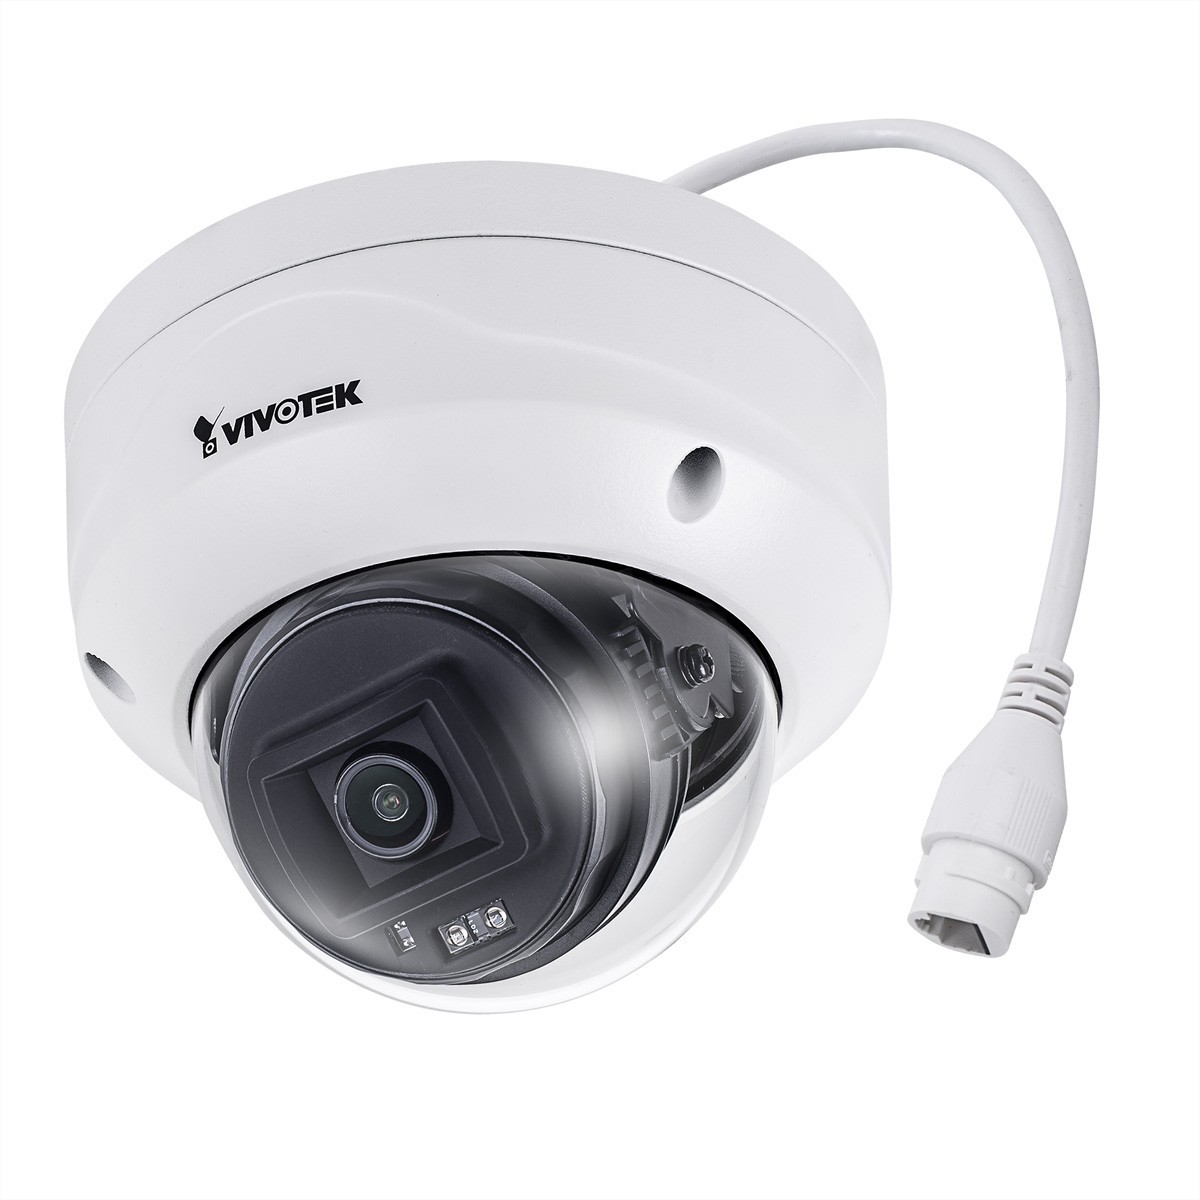 VIVOTEK FD9380-H (3.6mm) - IP security camera - Outdoor - Wired - CE - FCC Class B - UL - LVD - VCCI - C-Tick - Dome - Ceiling